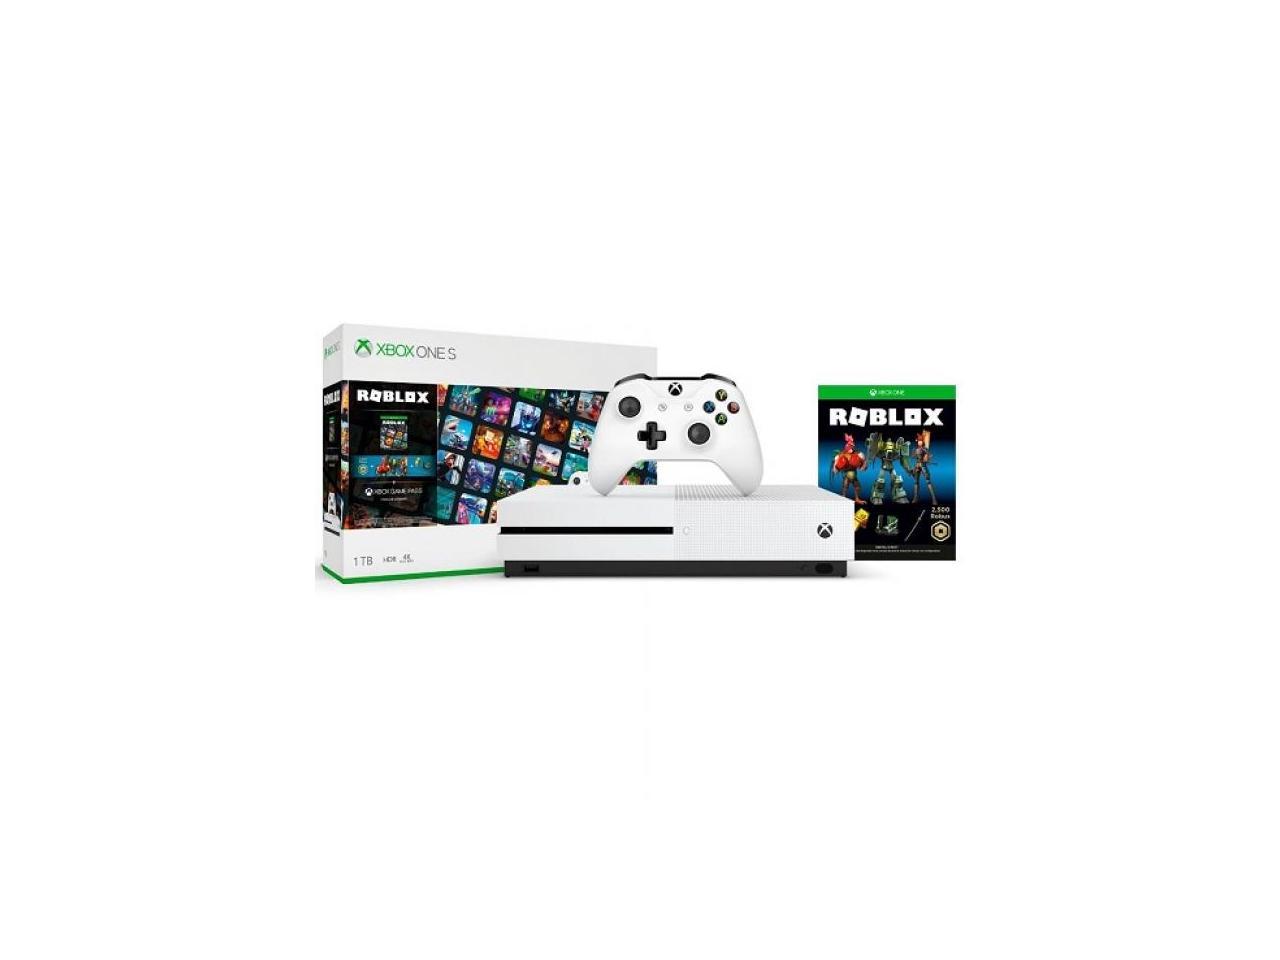 Xbox One S 1tb Roblox Console Bundle White Xbox One S Console Controller Full Download Of Roblox Included 4k Ultra Hd Blu Ray Video Streaming 3 Avatar Bundles - roblox gamepad support